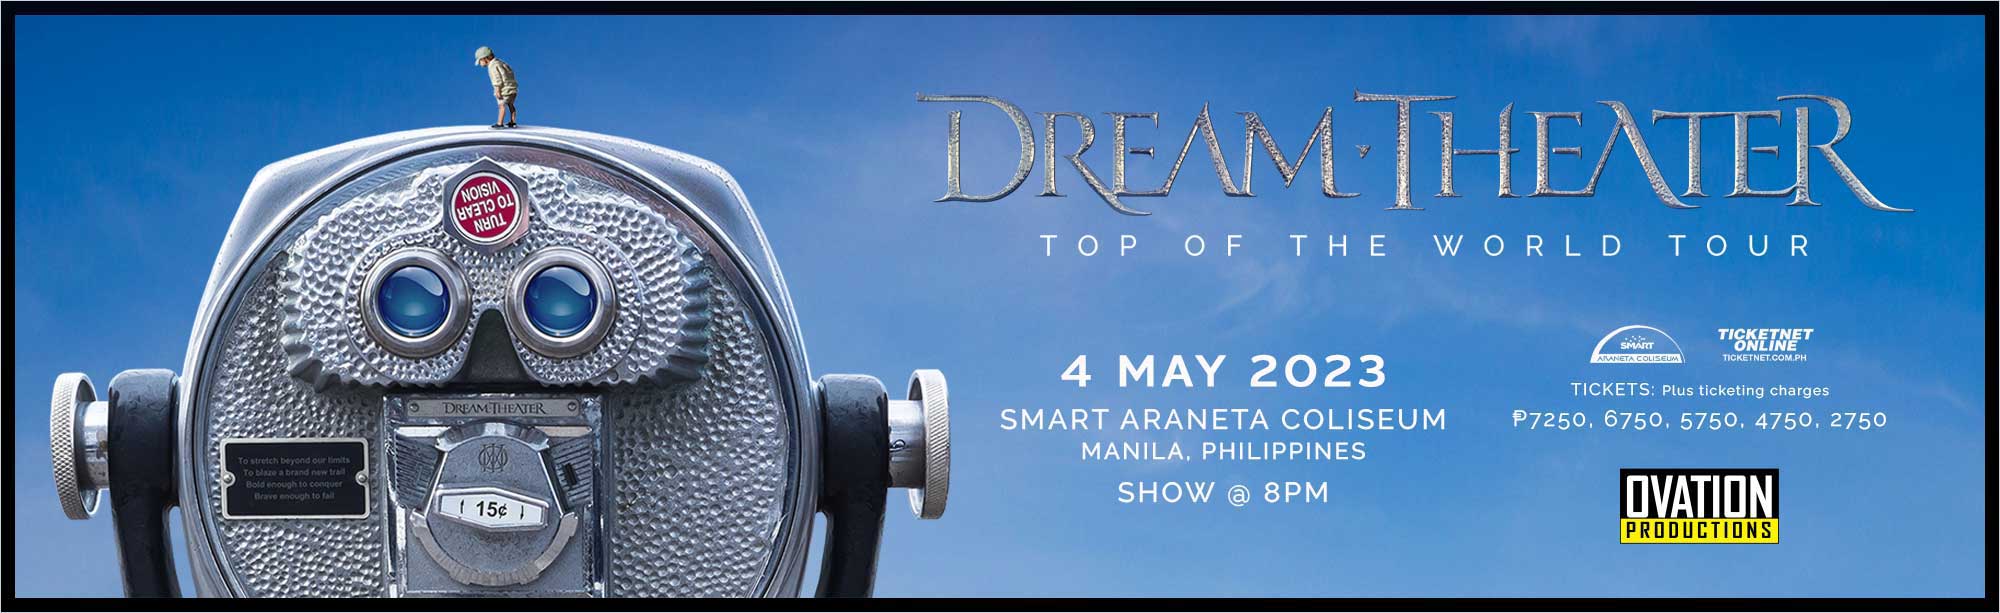 DREAMTHEATER - 4 May, 2023 